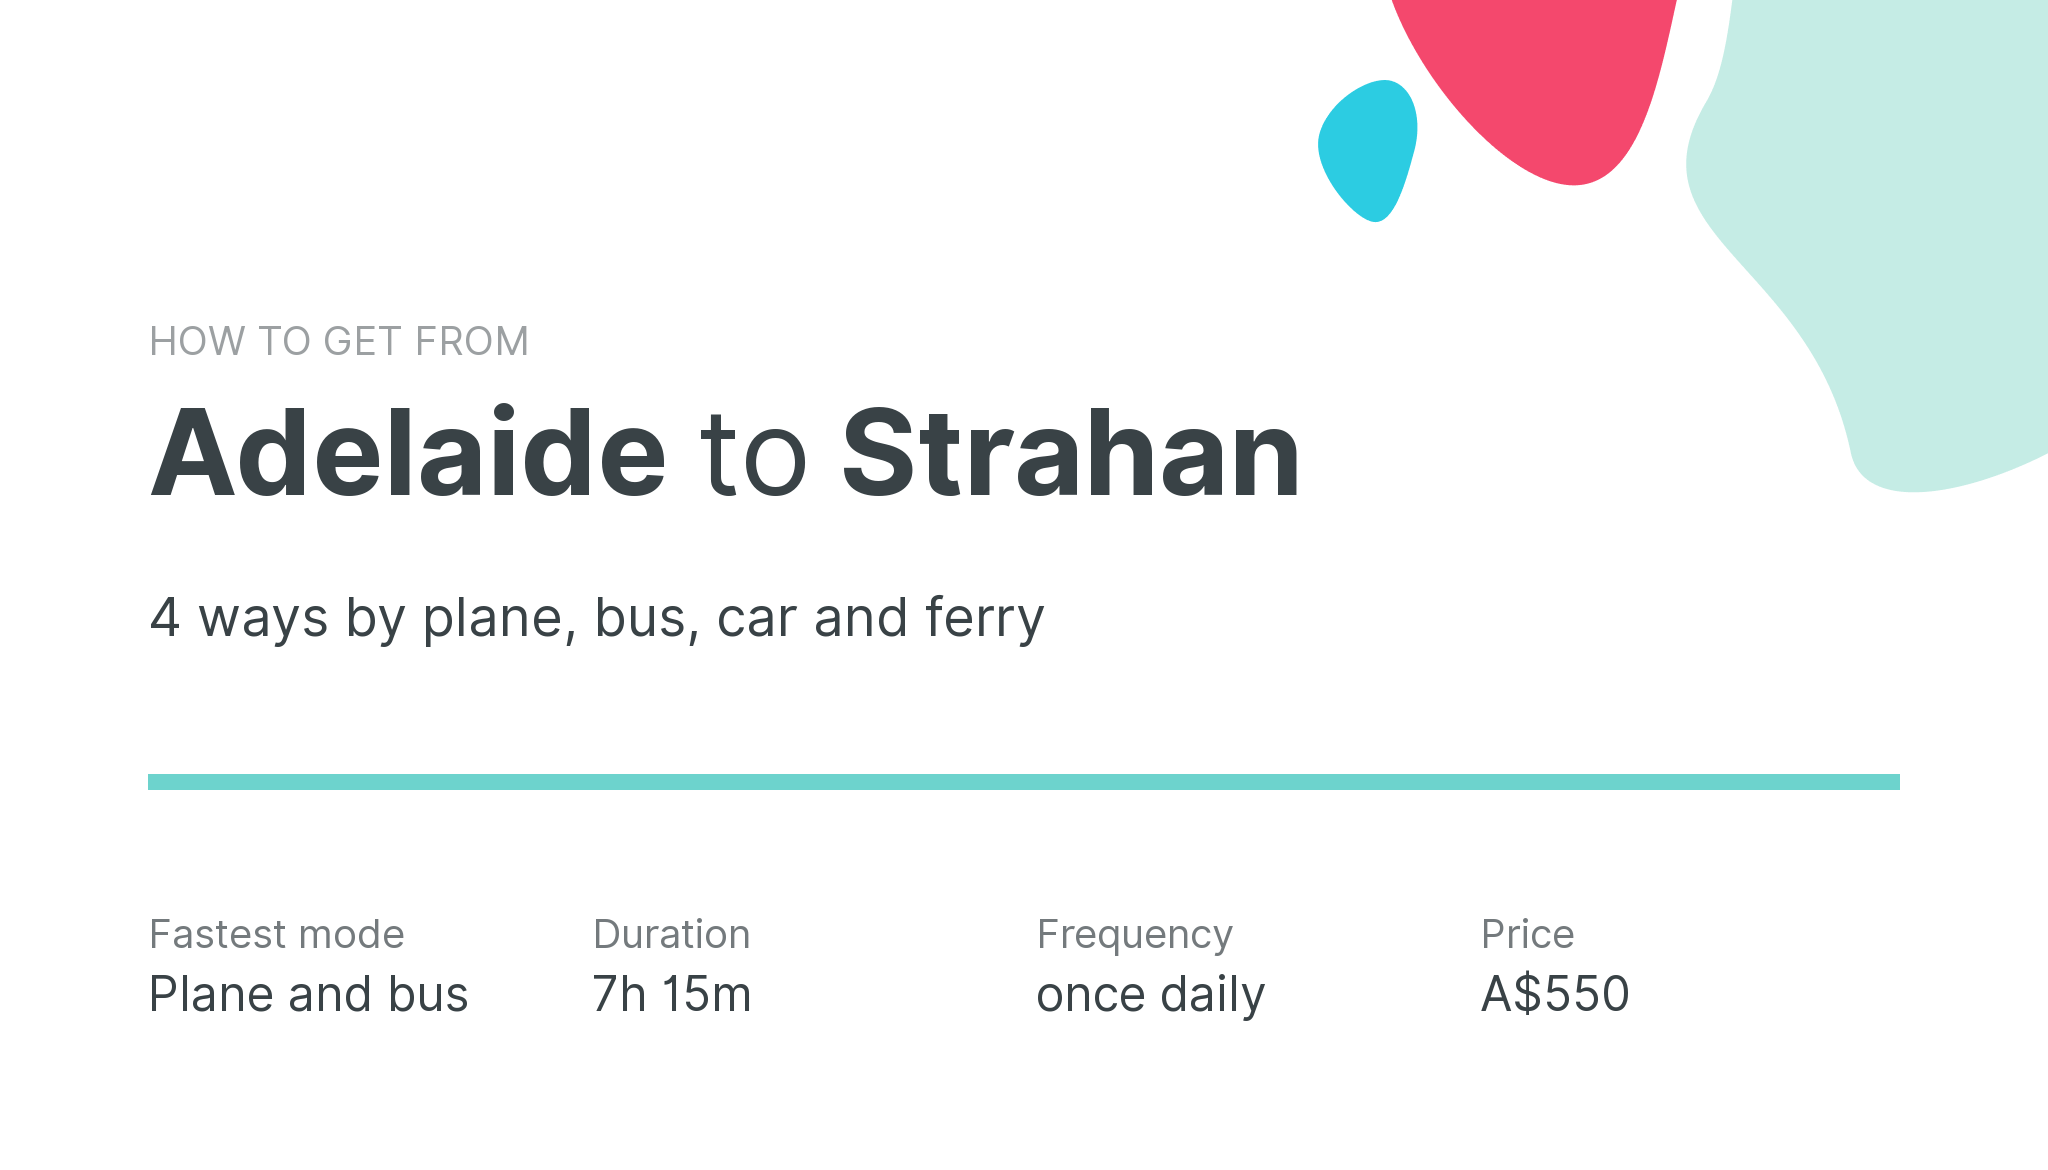 How do I get from Adelaide to Strahan